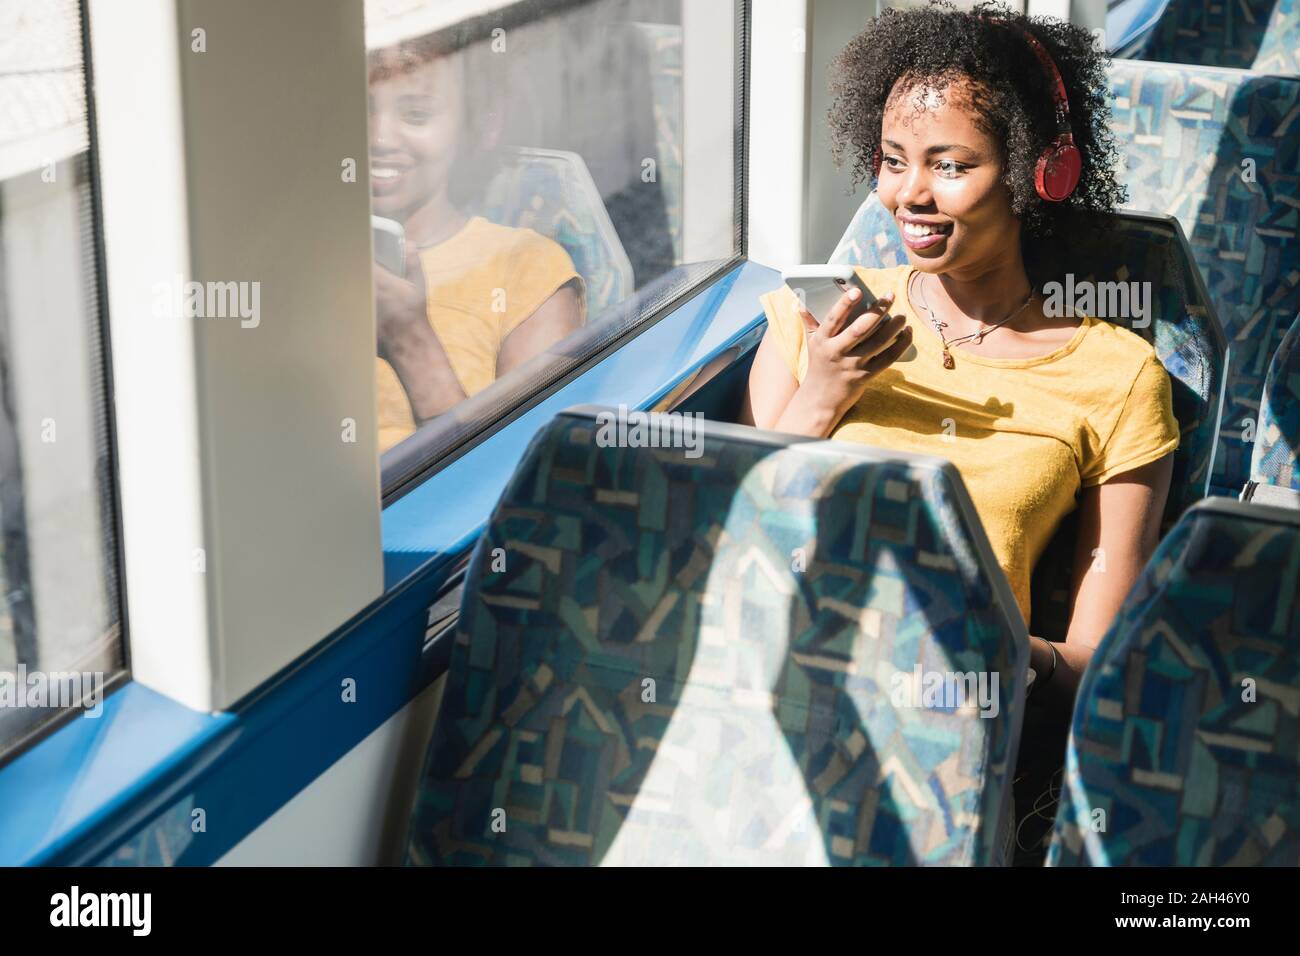 Smiling young woman with headphones and smartphone on a train Stock Photo